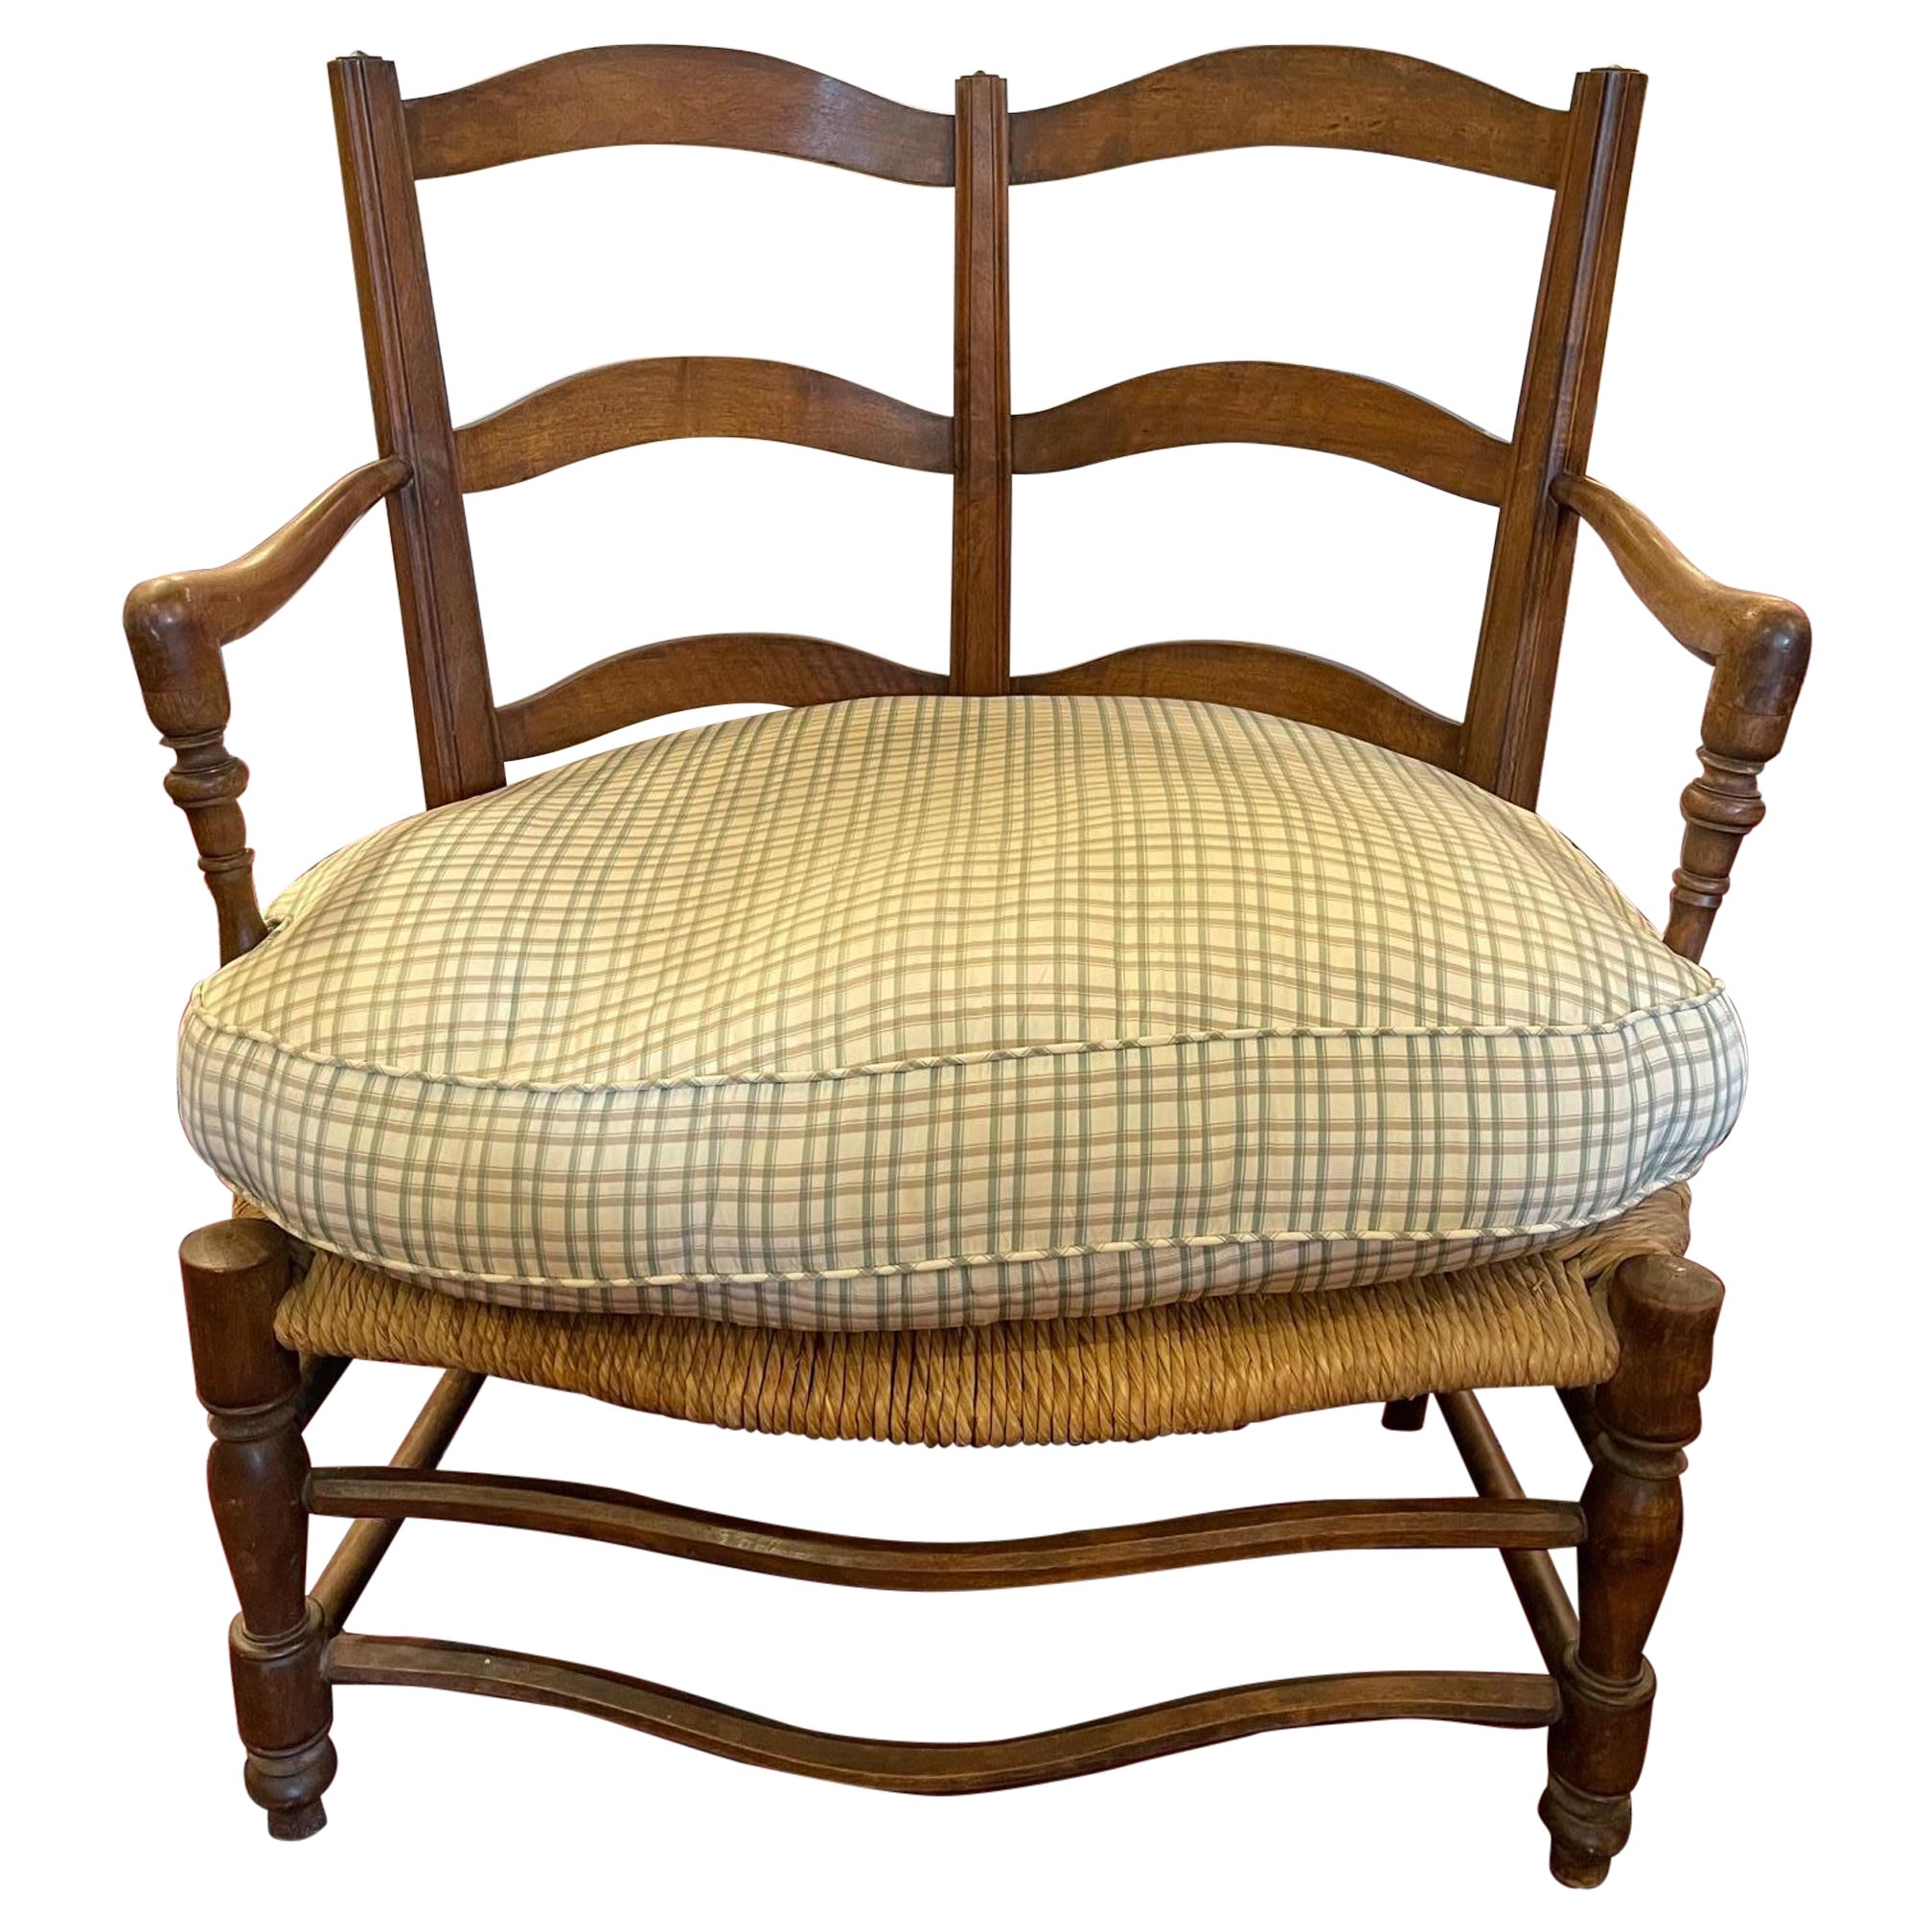 French Provincial Two Seater Rush Seat Bench, Late 19th/Early 20th Century